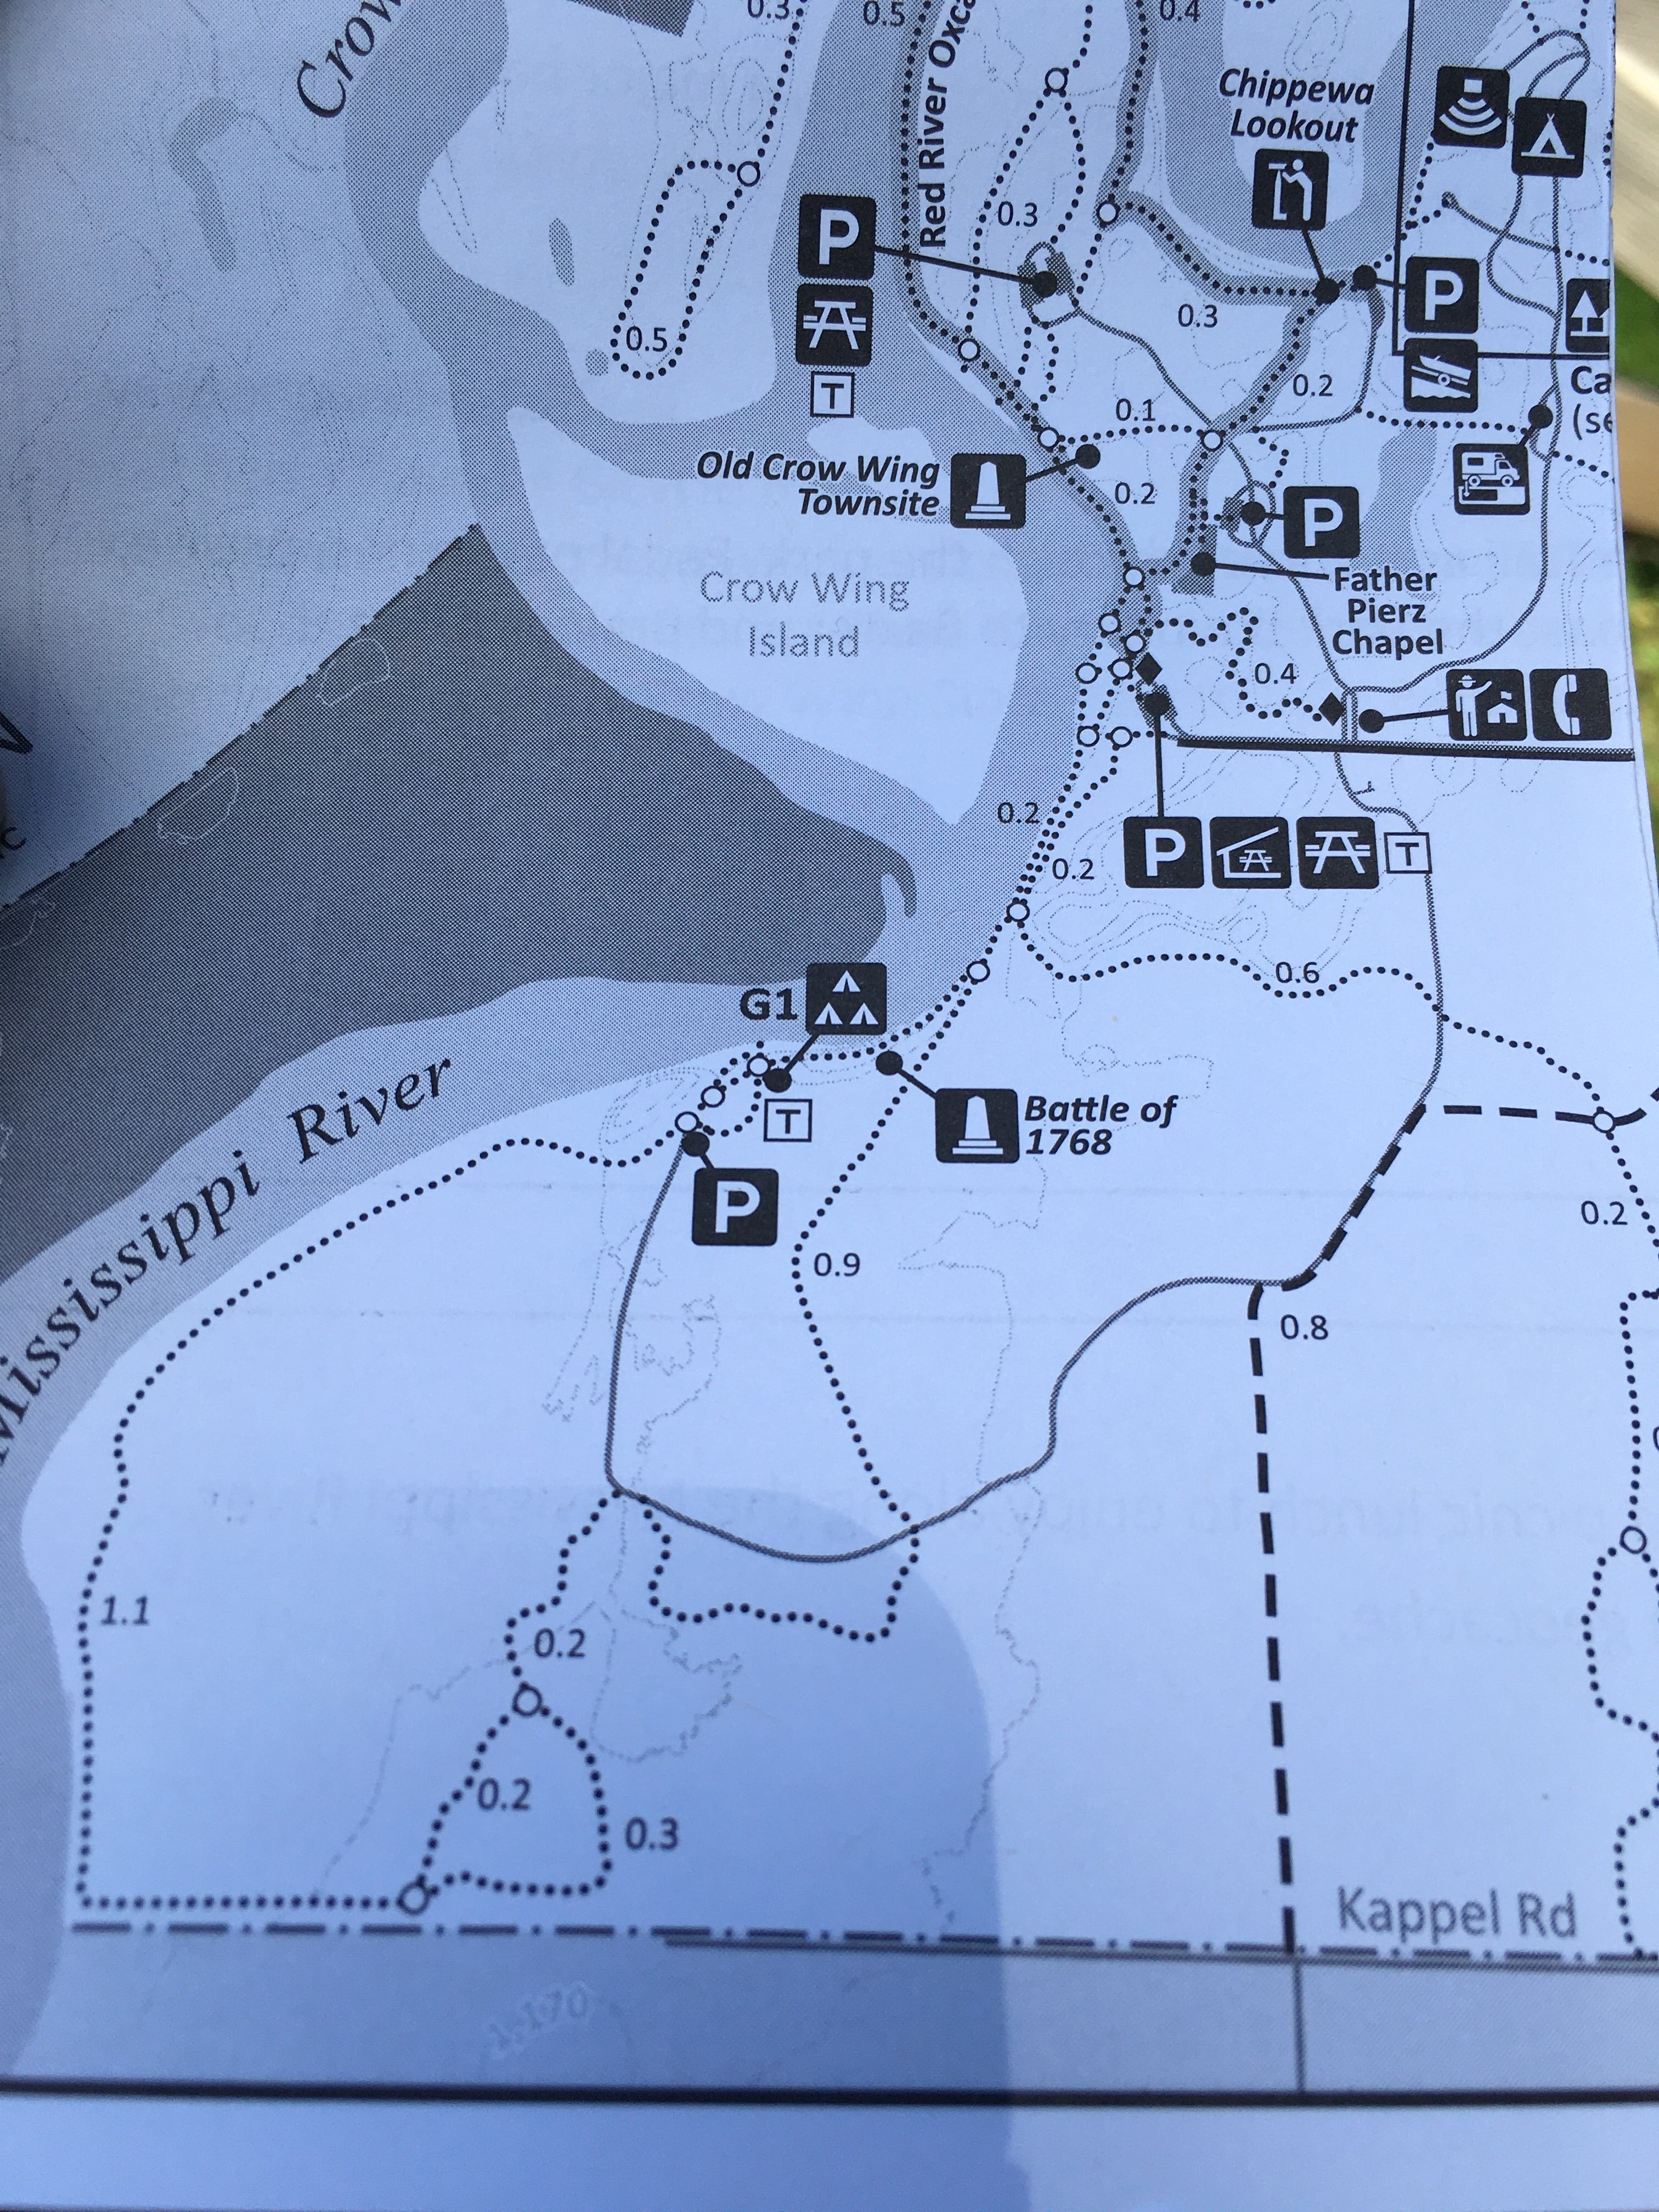 The canoe campsite is not currently highlighted on the park map. The group camp is actually located by the "G1" notation, and the canoe campsite is adjacent but a bit to the north east between the three tent icon and the little sandbar in the river.